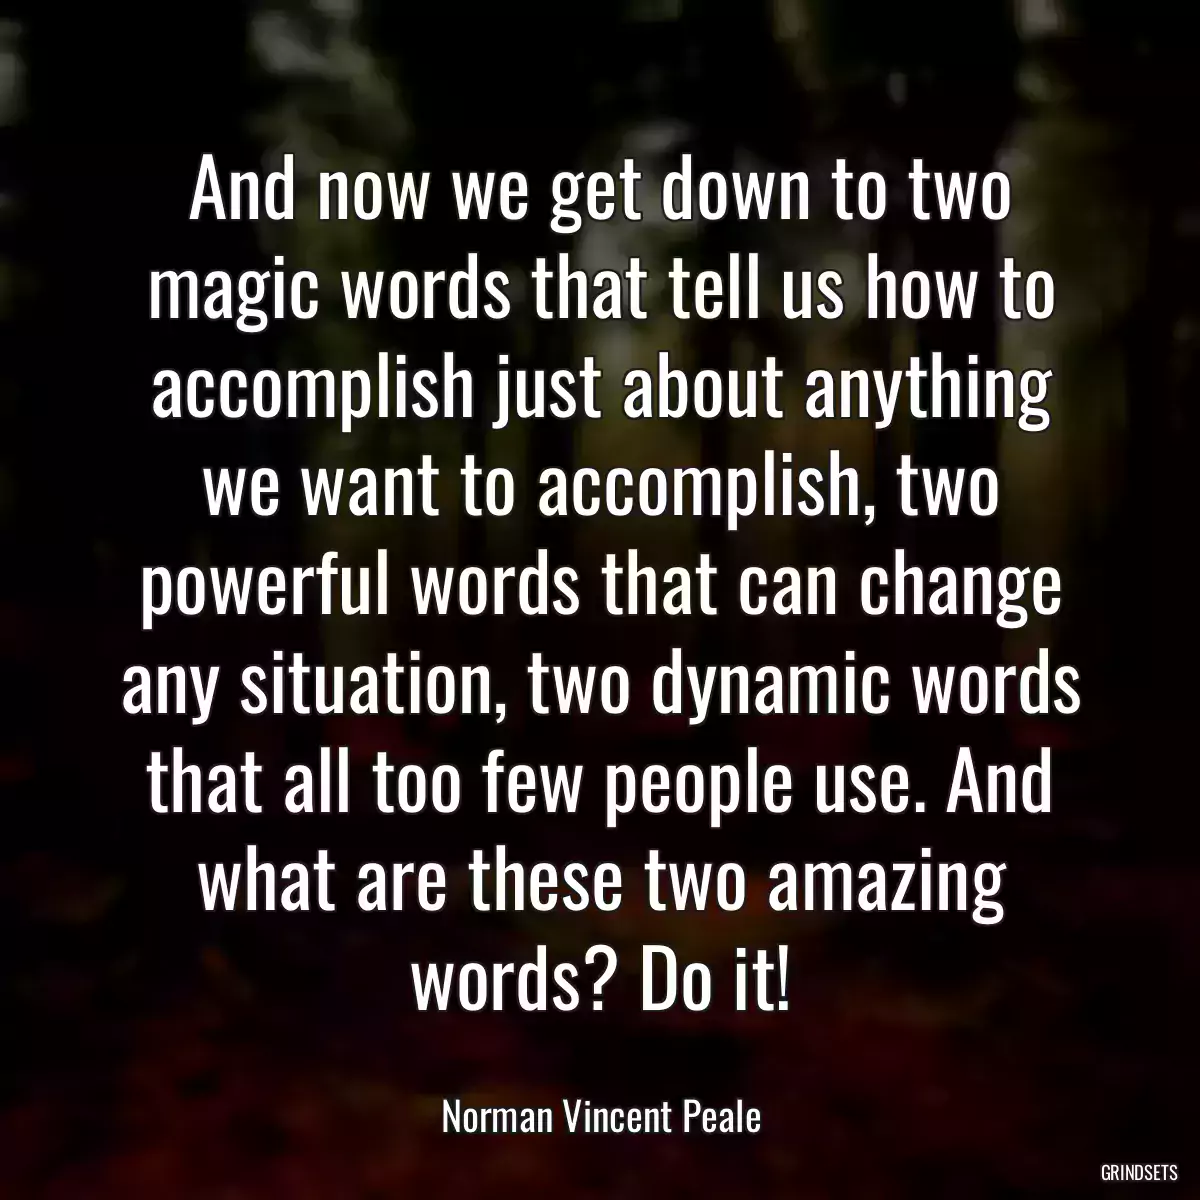 And now we get down to two magic words that tell us how to accomplish just about anything we want to accomplish, two powerful words that can change any situation, two dynamic words that all too few people use. And what are these two amazing words? Do it!